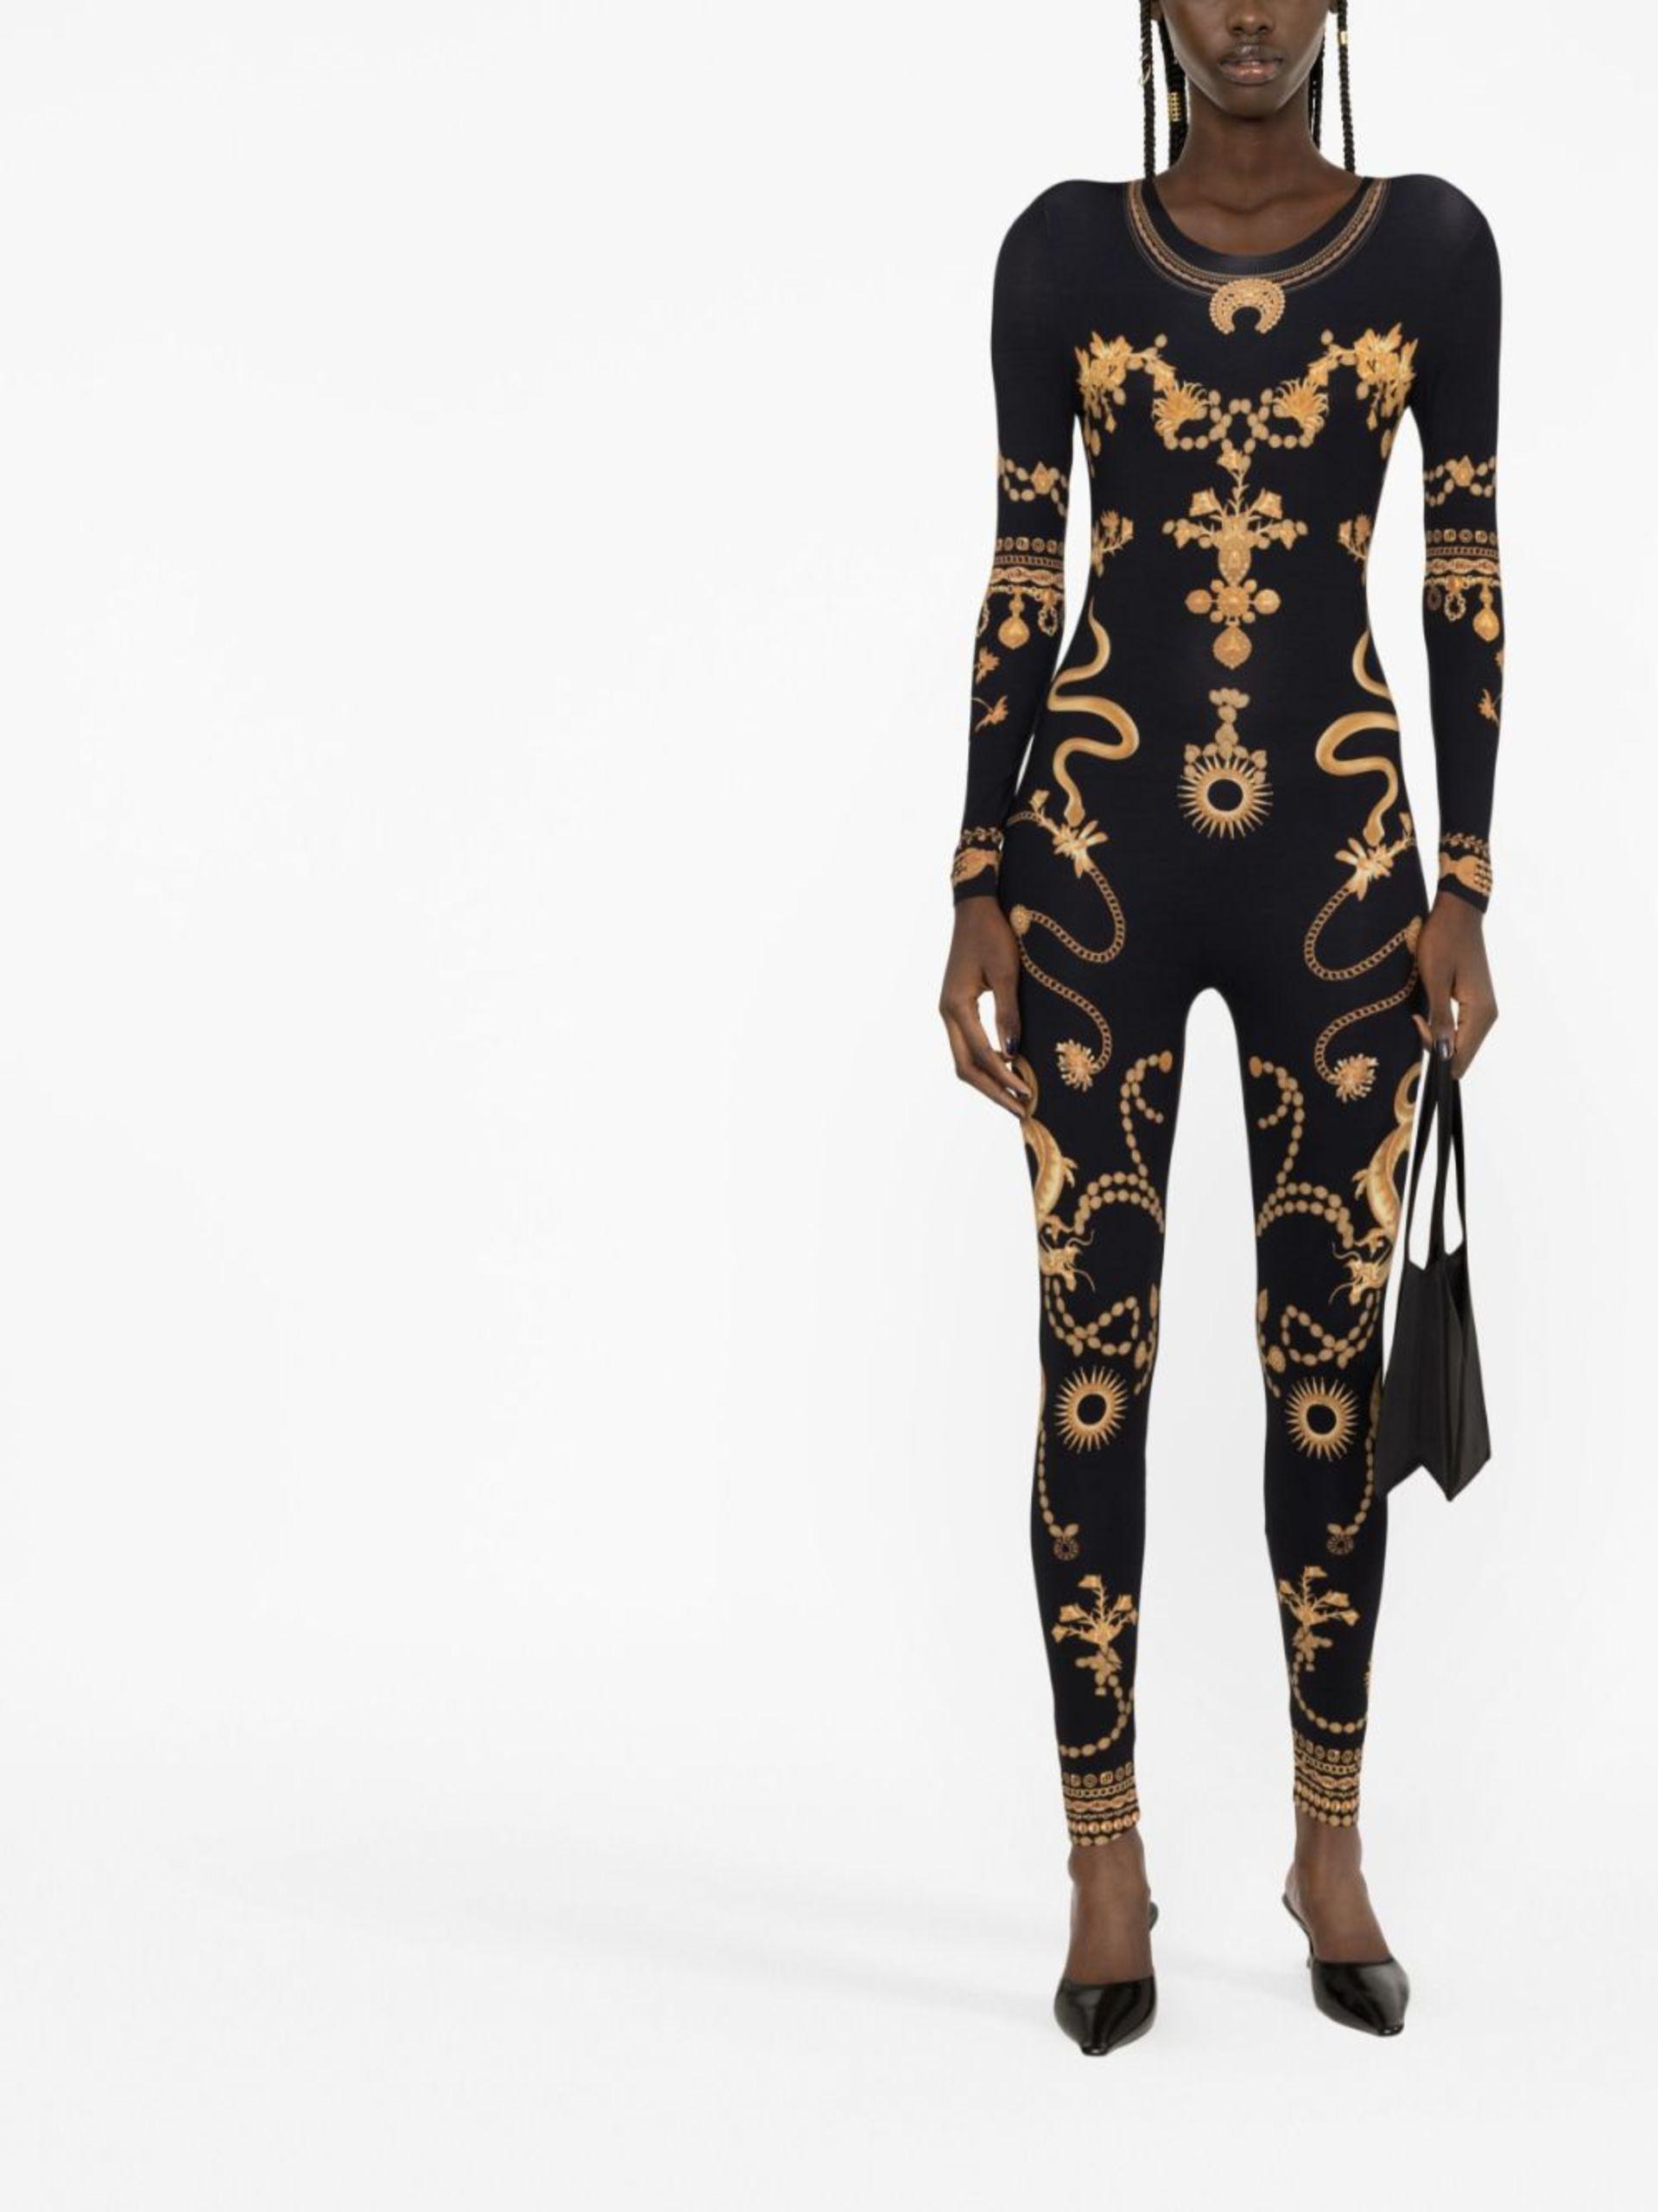 How should I style this jumpsuit? Tan/beige accessories? Black? With gold  jewelry I think. : r/fashionadvice